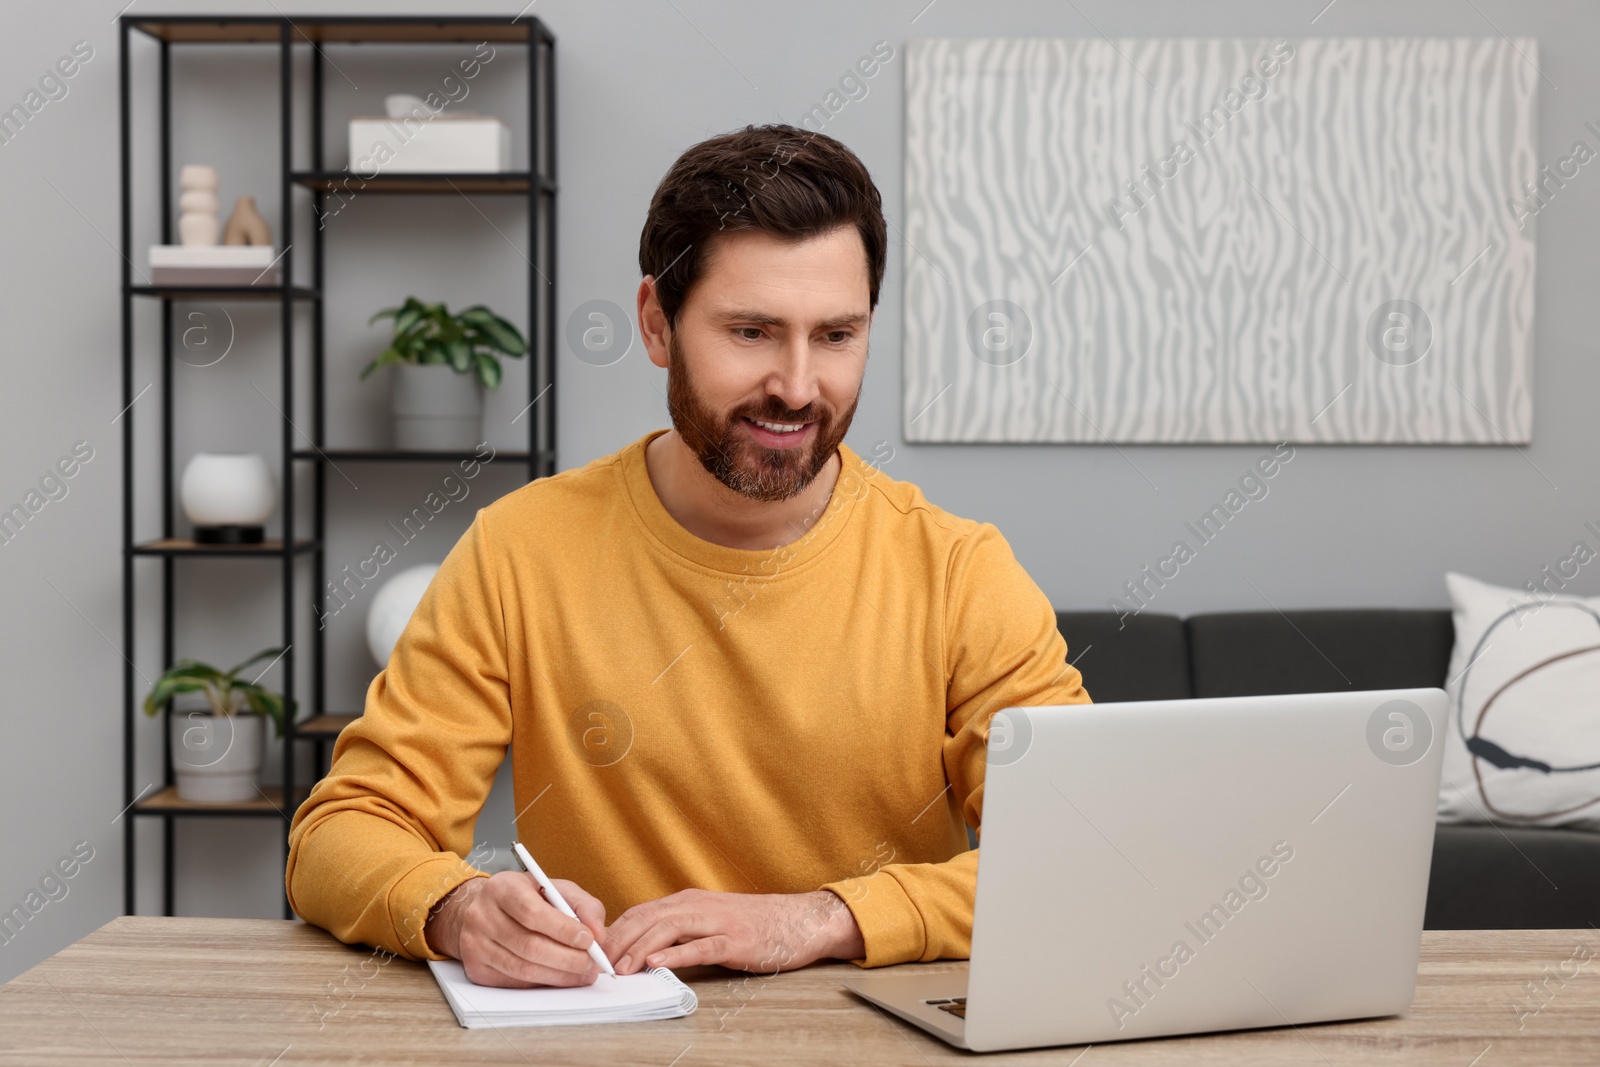 Photo of Man using laptop and writing something in notebook at wooden table indoors